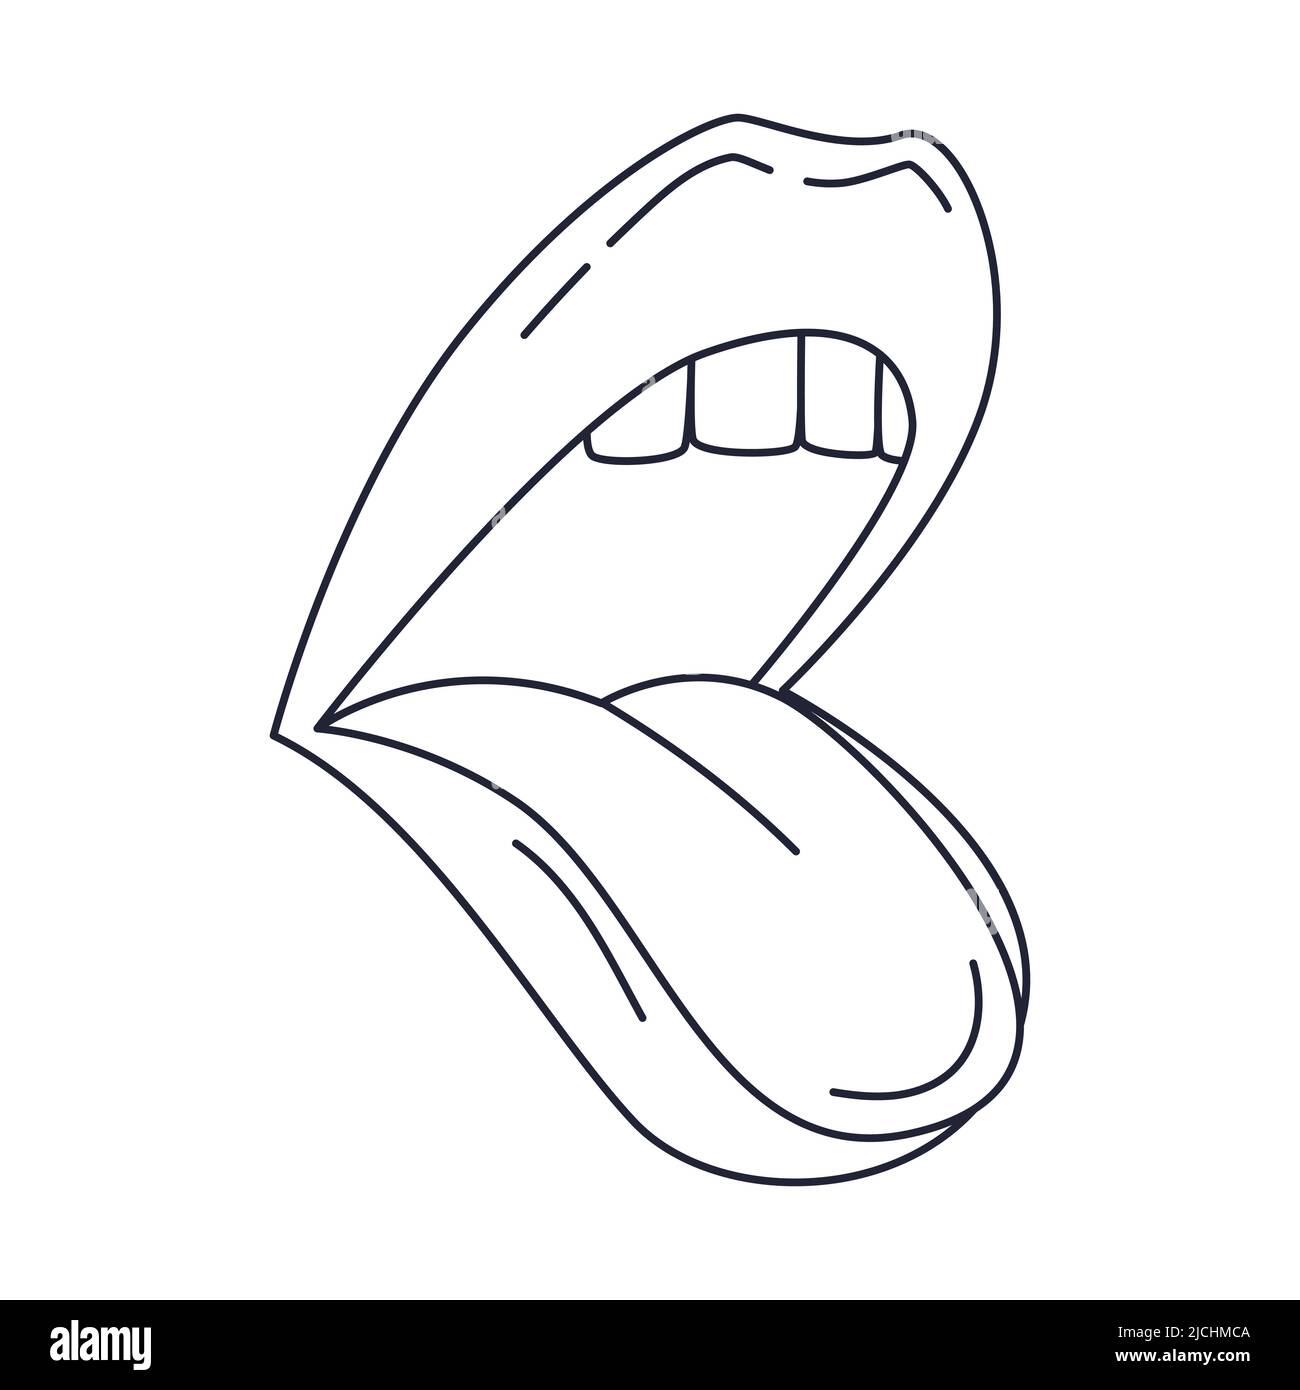 Female talking, singing or screaming open mouth. Shows the tongue. Human lips. Outline doodle. Black and white vector illustration isolated on white b Stock Vector